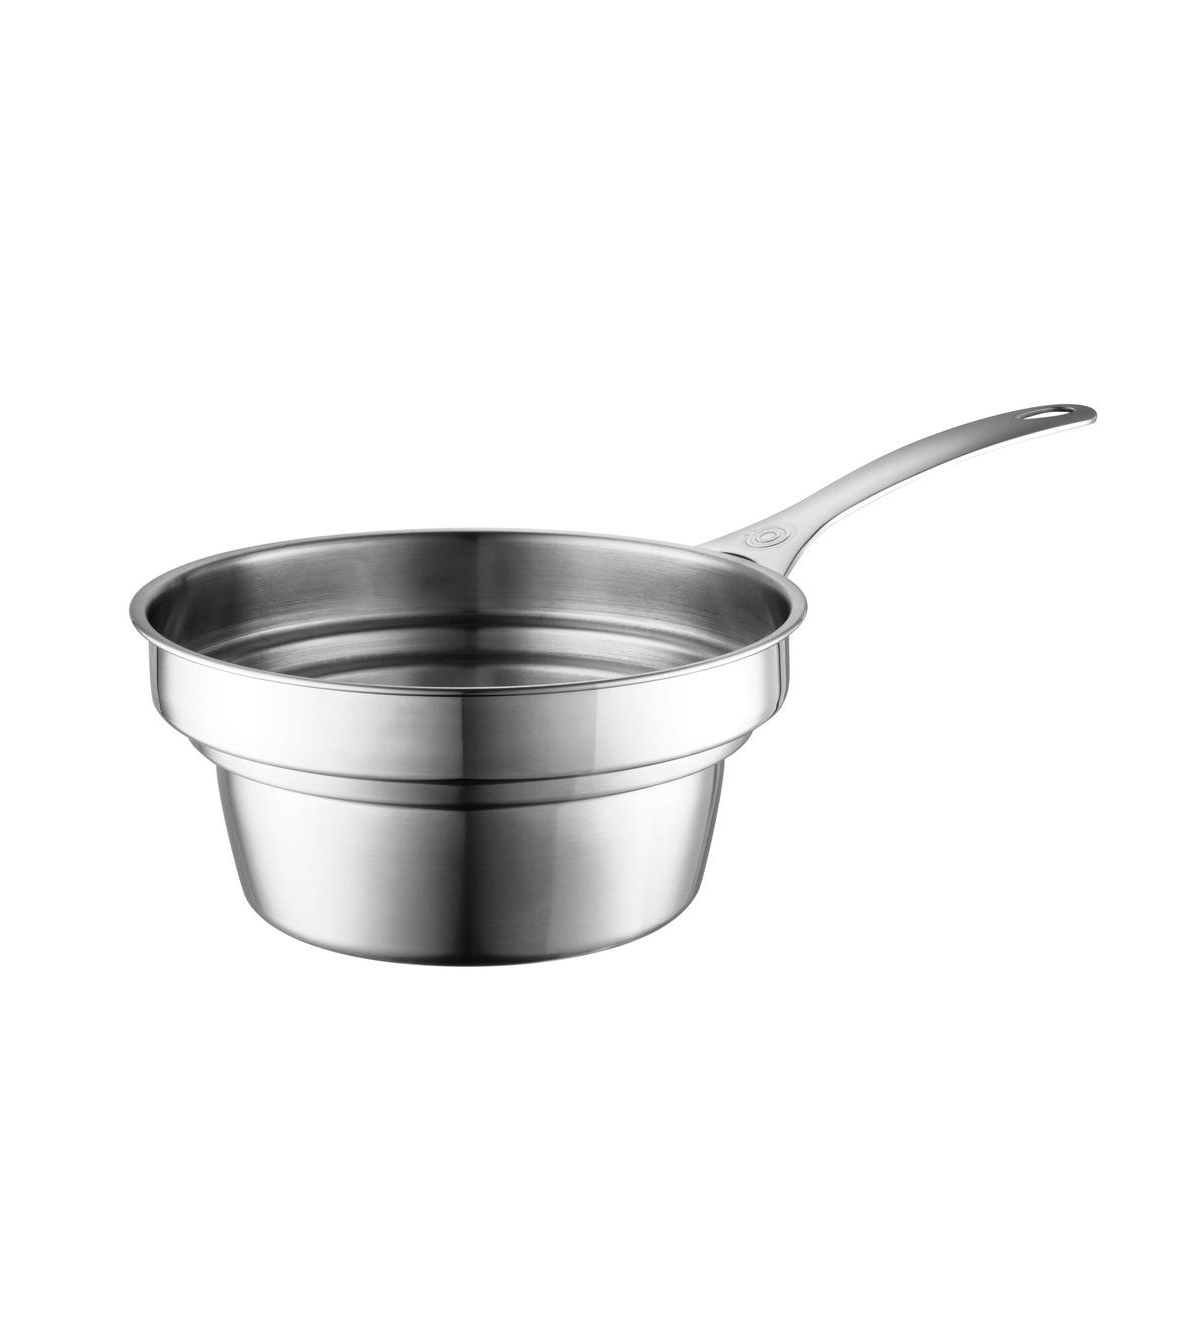 Le Creuset 2.2-qt. Stainless Steel Double Boiler Insert In N,a